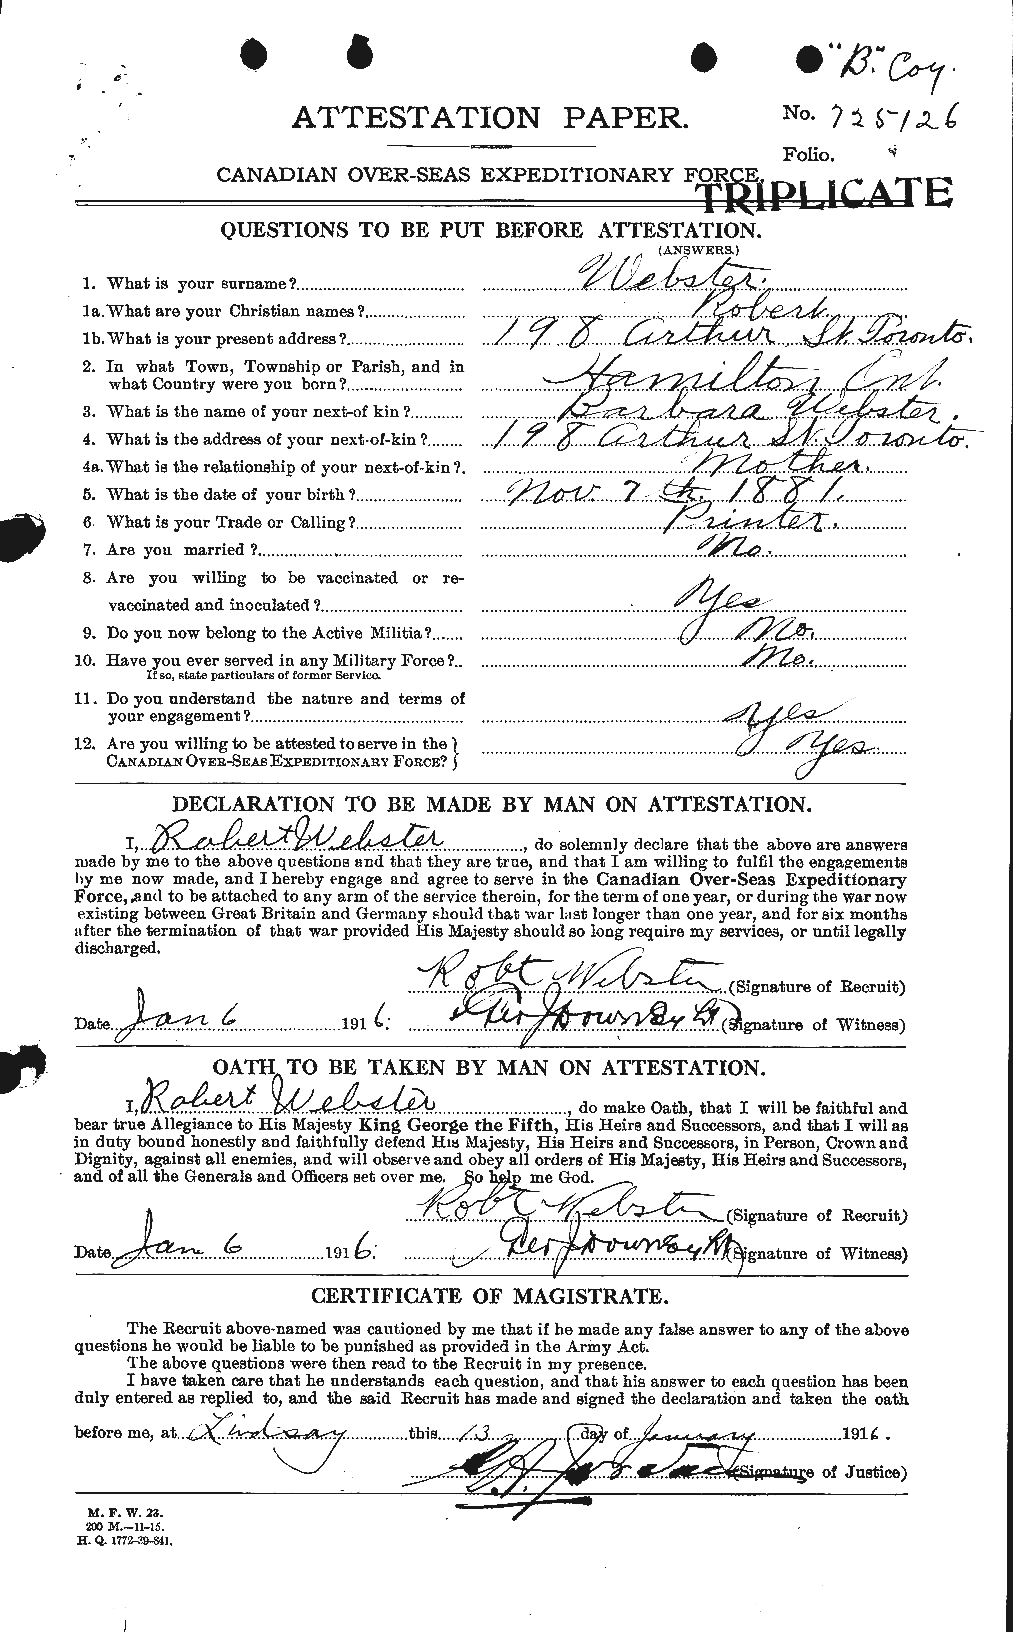 Personnel Records of the First World War - CEF 670544a